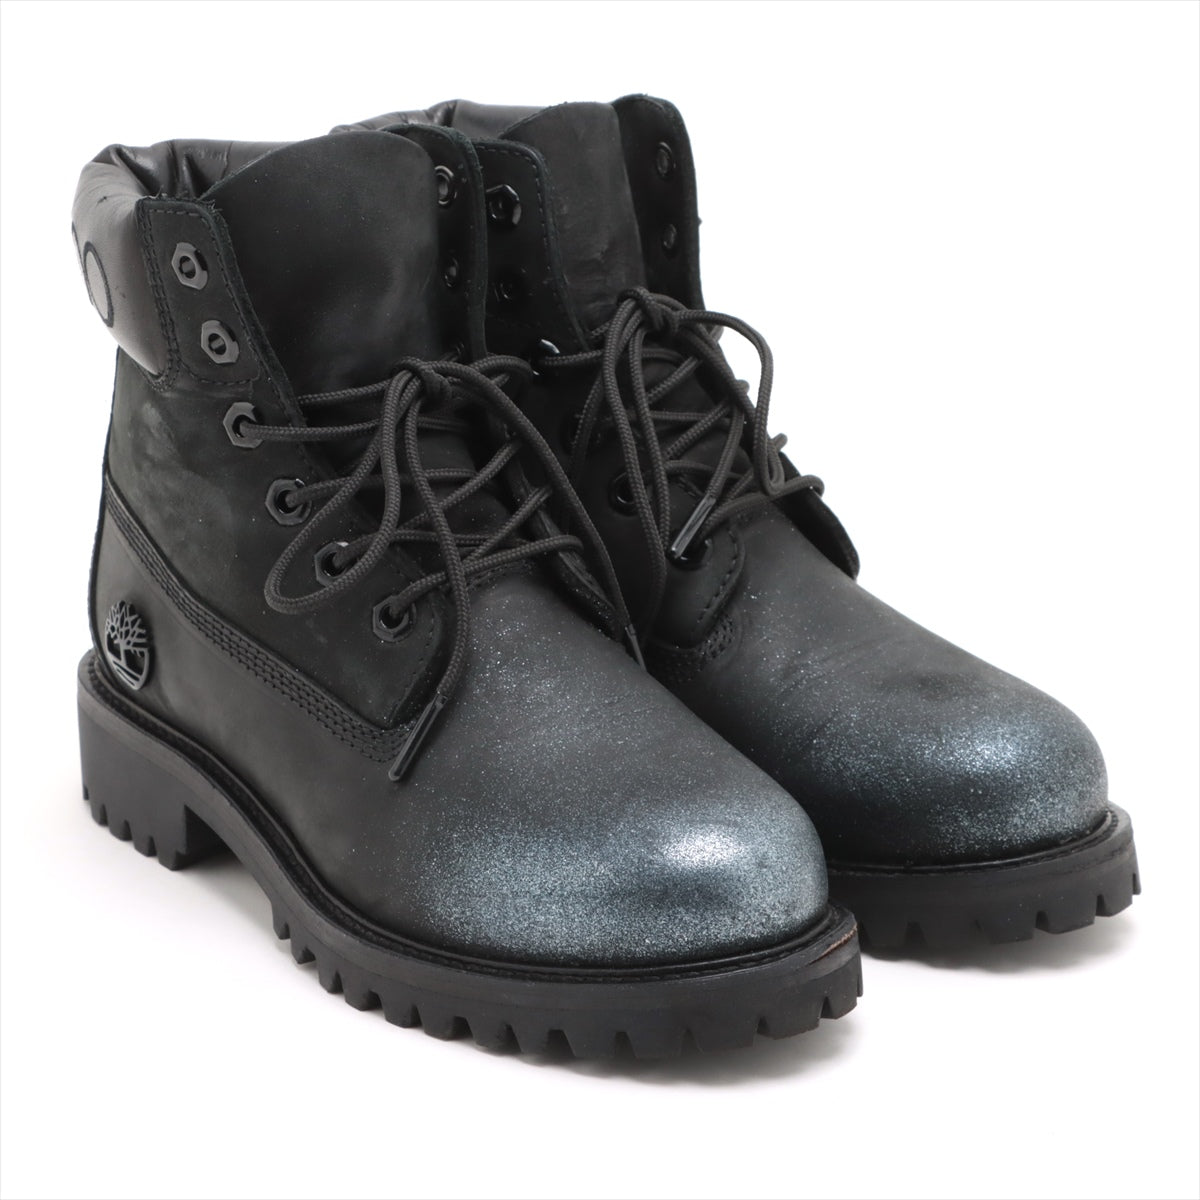 Jimmy Choo x Timberland Leather Short Boots 6 Ladies' Black premium high cut boots Box Included